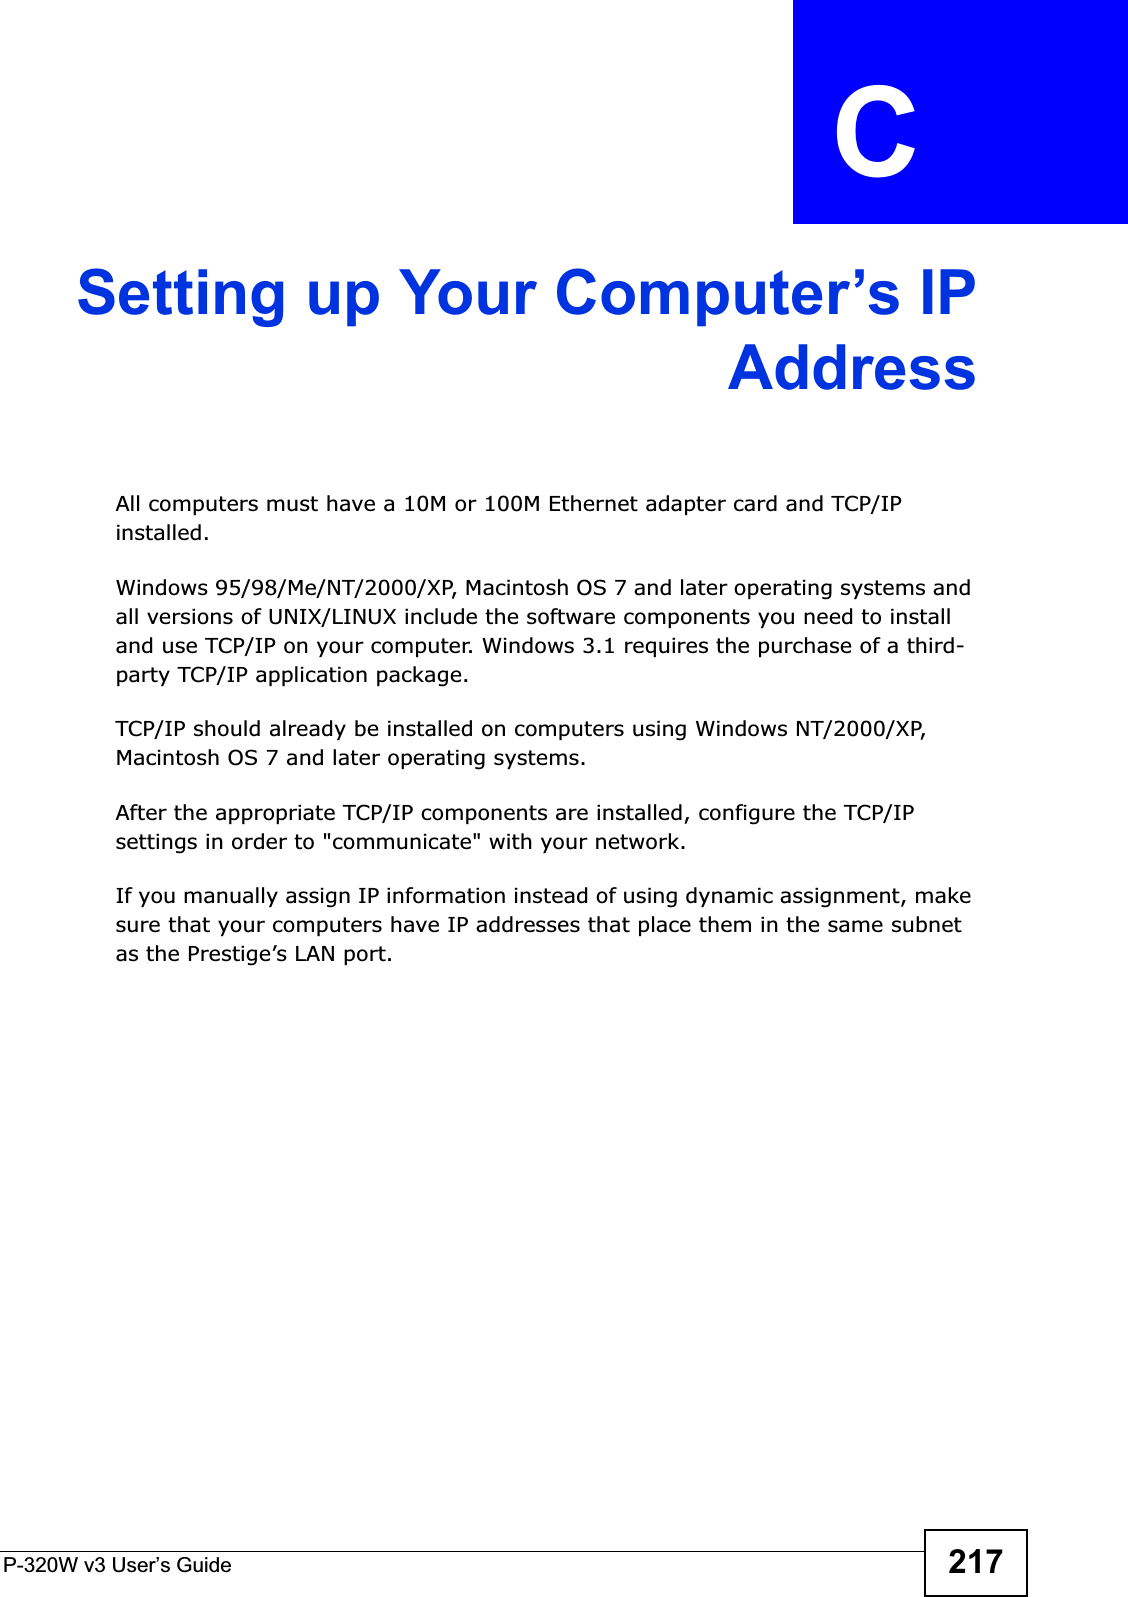 P-320W v3 User’s Guide 217APPENDIX  C Setting up Your Computer’s IPAddressAll computers must have a 10M or 100M Ethernet adapter card and TCP/IP installed. Windows 95/98/Me/NT/2000/XP, Macintosh OS 7 and later operating systems and all versions of UNIX/LINUX include the software components you need to install and use TCP/IP on your computer. Windows 3.1 requires the purchase of a third-party TCP/IP application package.TCP/IP should already be installed on computers using Windows NT/2000/XP, Macintosh OS 7 and later operating systems.After the appropriate TCP/IP components are installed, configure the TCP/IP settings in order to &quot;communicate&quot; with your network. If you manually assign IP information instead of using dynamic assignment, make sure that your computers have IP addresses that place them in the same subnet as the Prestige’s LAN port.